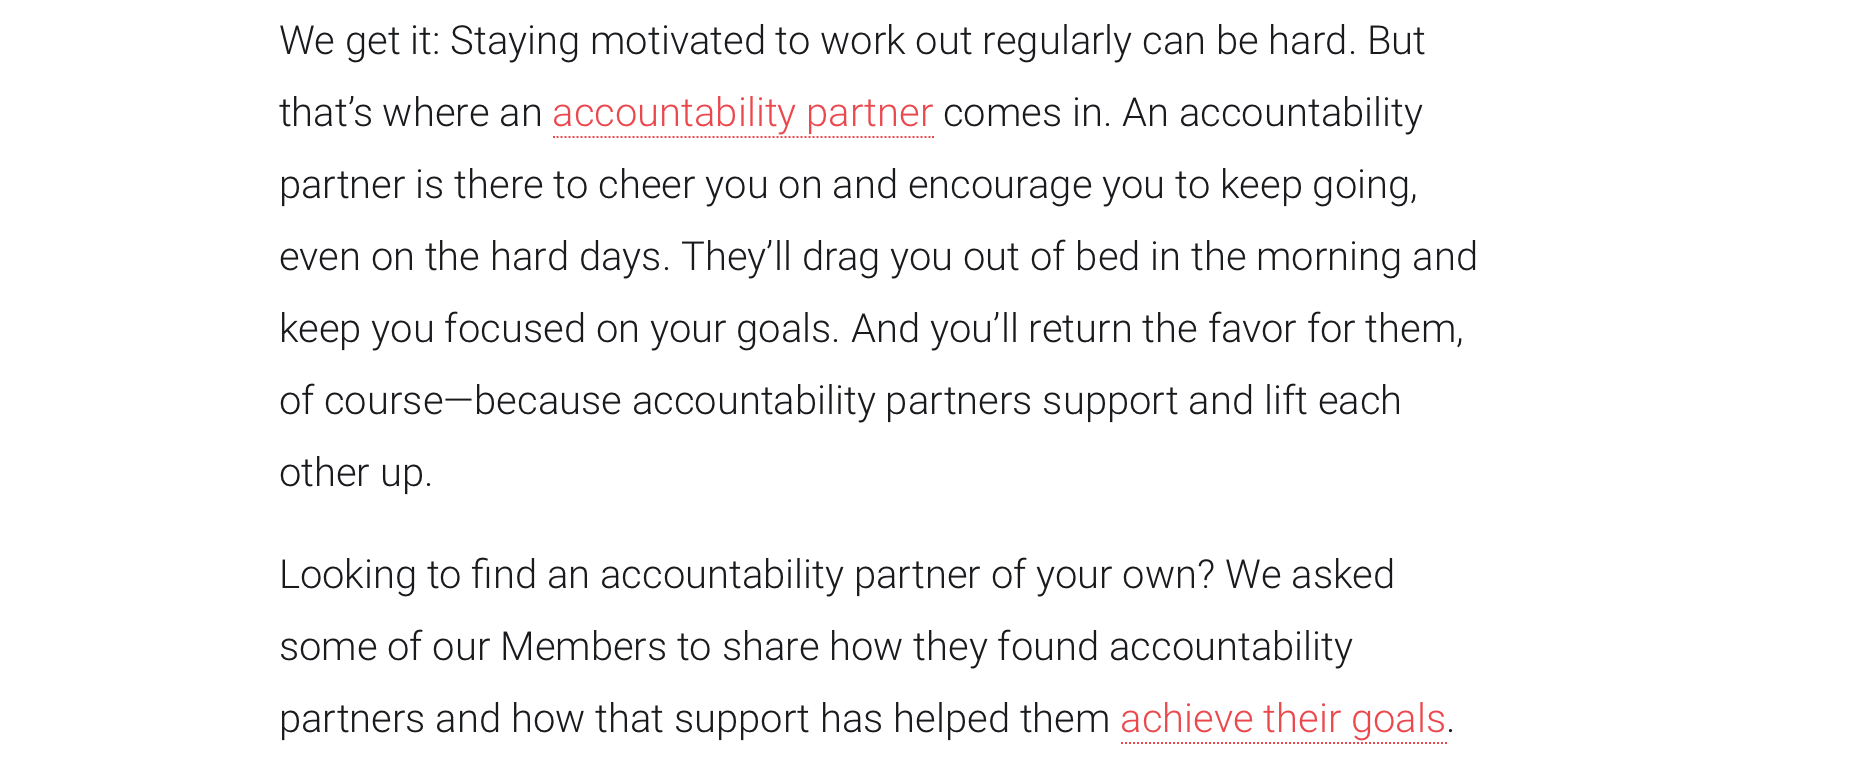 screenshot from Peleton blog post: We get it: Staying motivated to work out regularly can be hard. But that’s where an accountability partner comes in. An accountability partner is there to cheer you on and encourage you to keep going, even on the hard days. They’ll drag you out of bed in the morning and keep you focused on your goals. And you’ll return the favor for them, of course—because accountability partners support and lift each other up.   Looking to find an accountability partner of your own? We asked some of our Members to share how they found accountability partners and how that support has helped them achieve their goals.